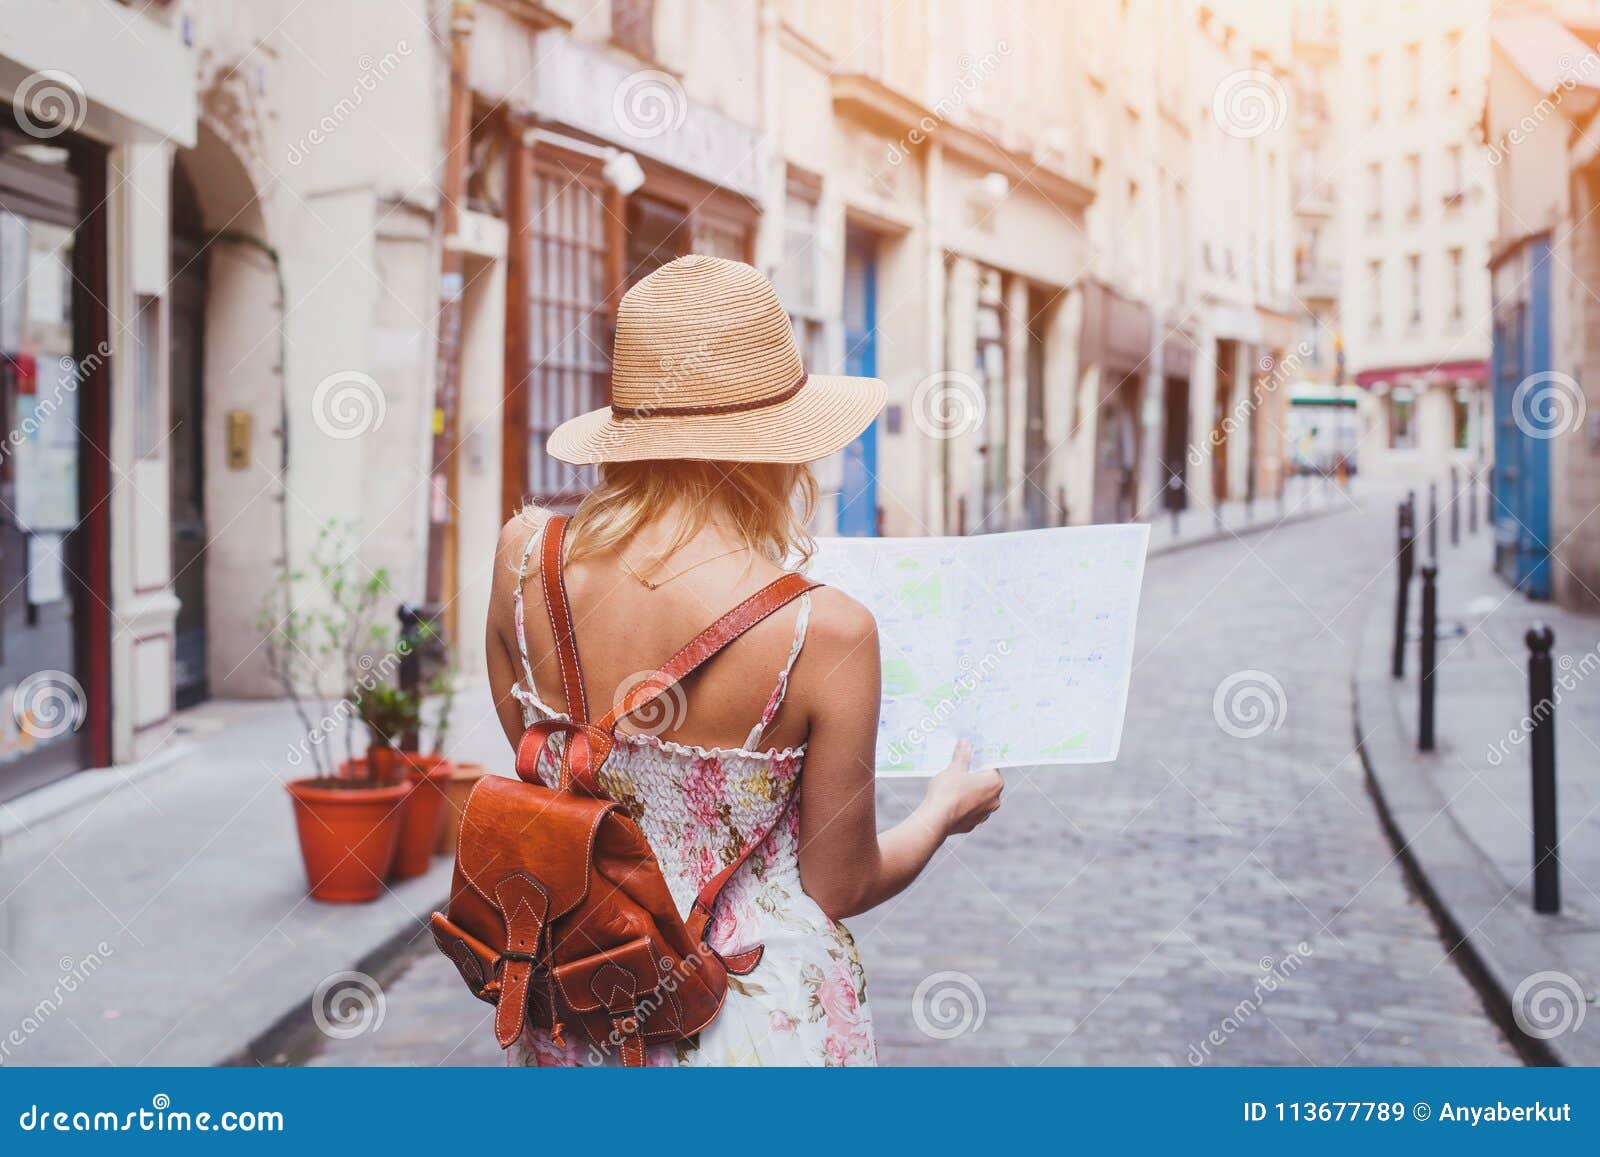 travel guide, tourism in europe, woman tourist with map